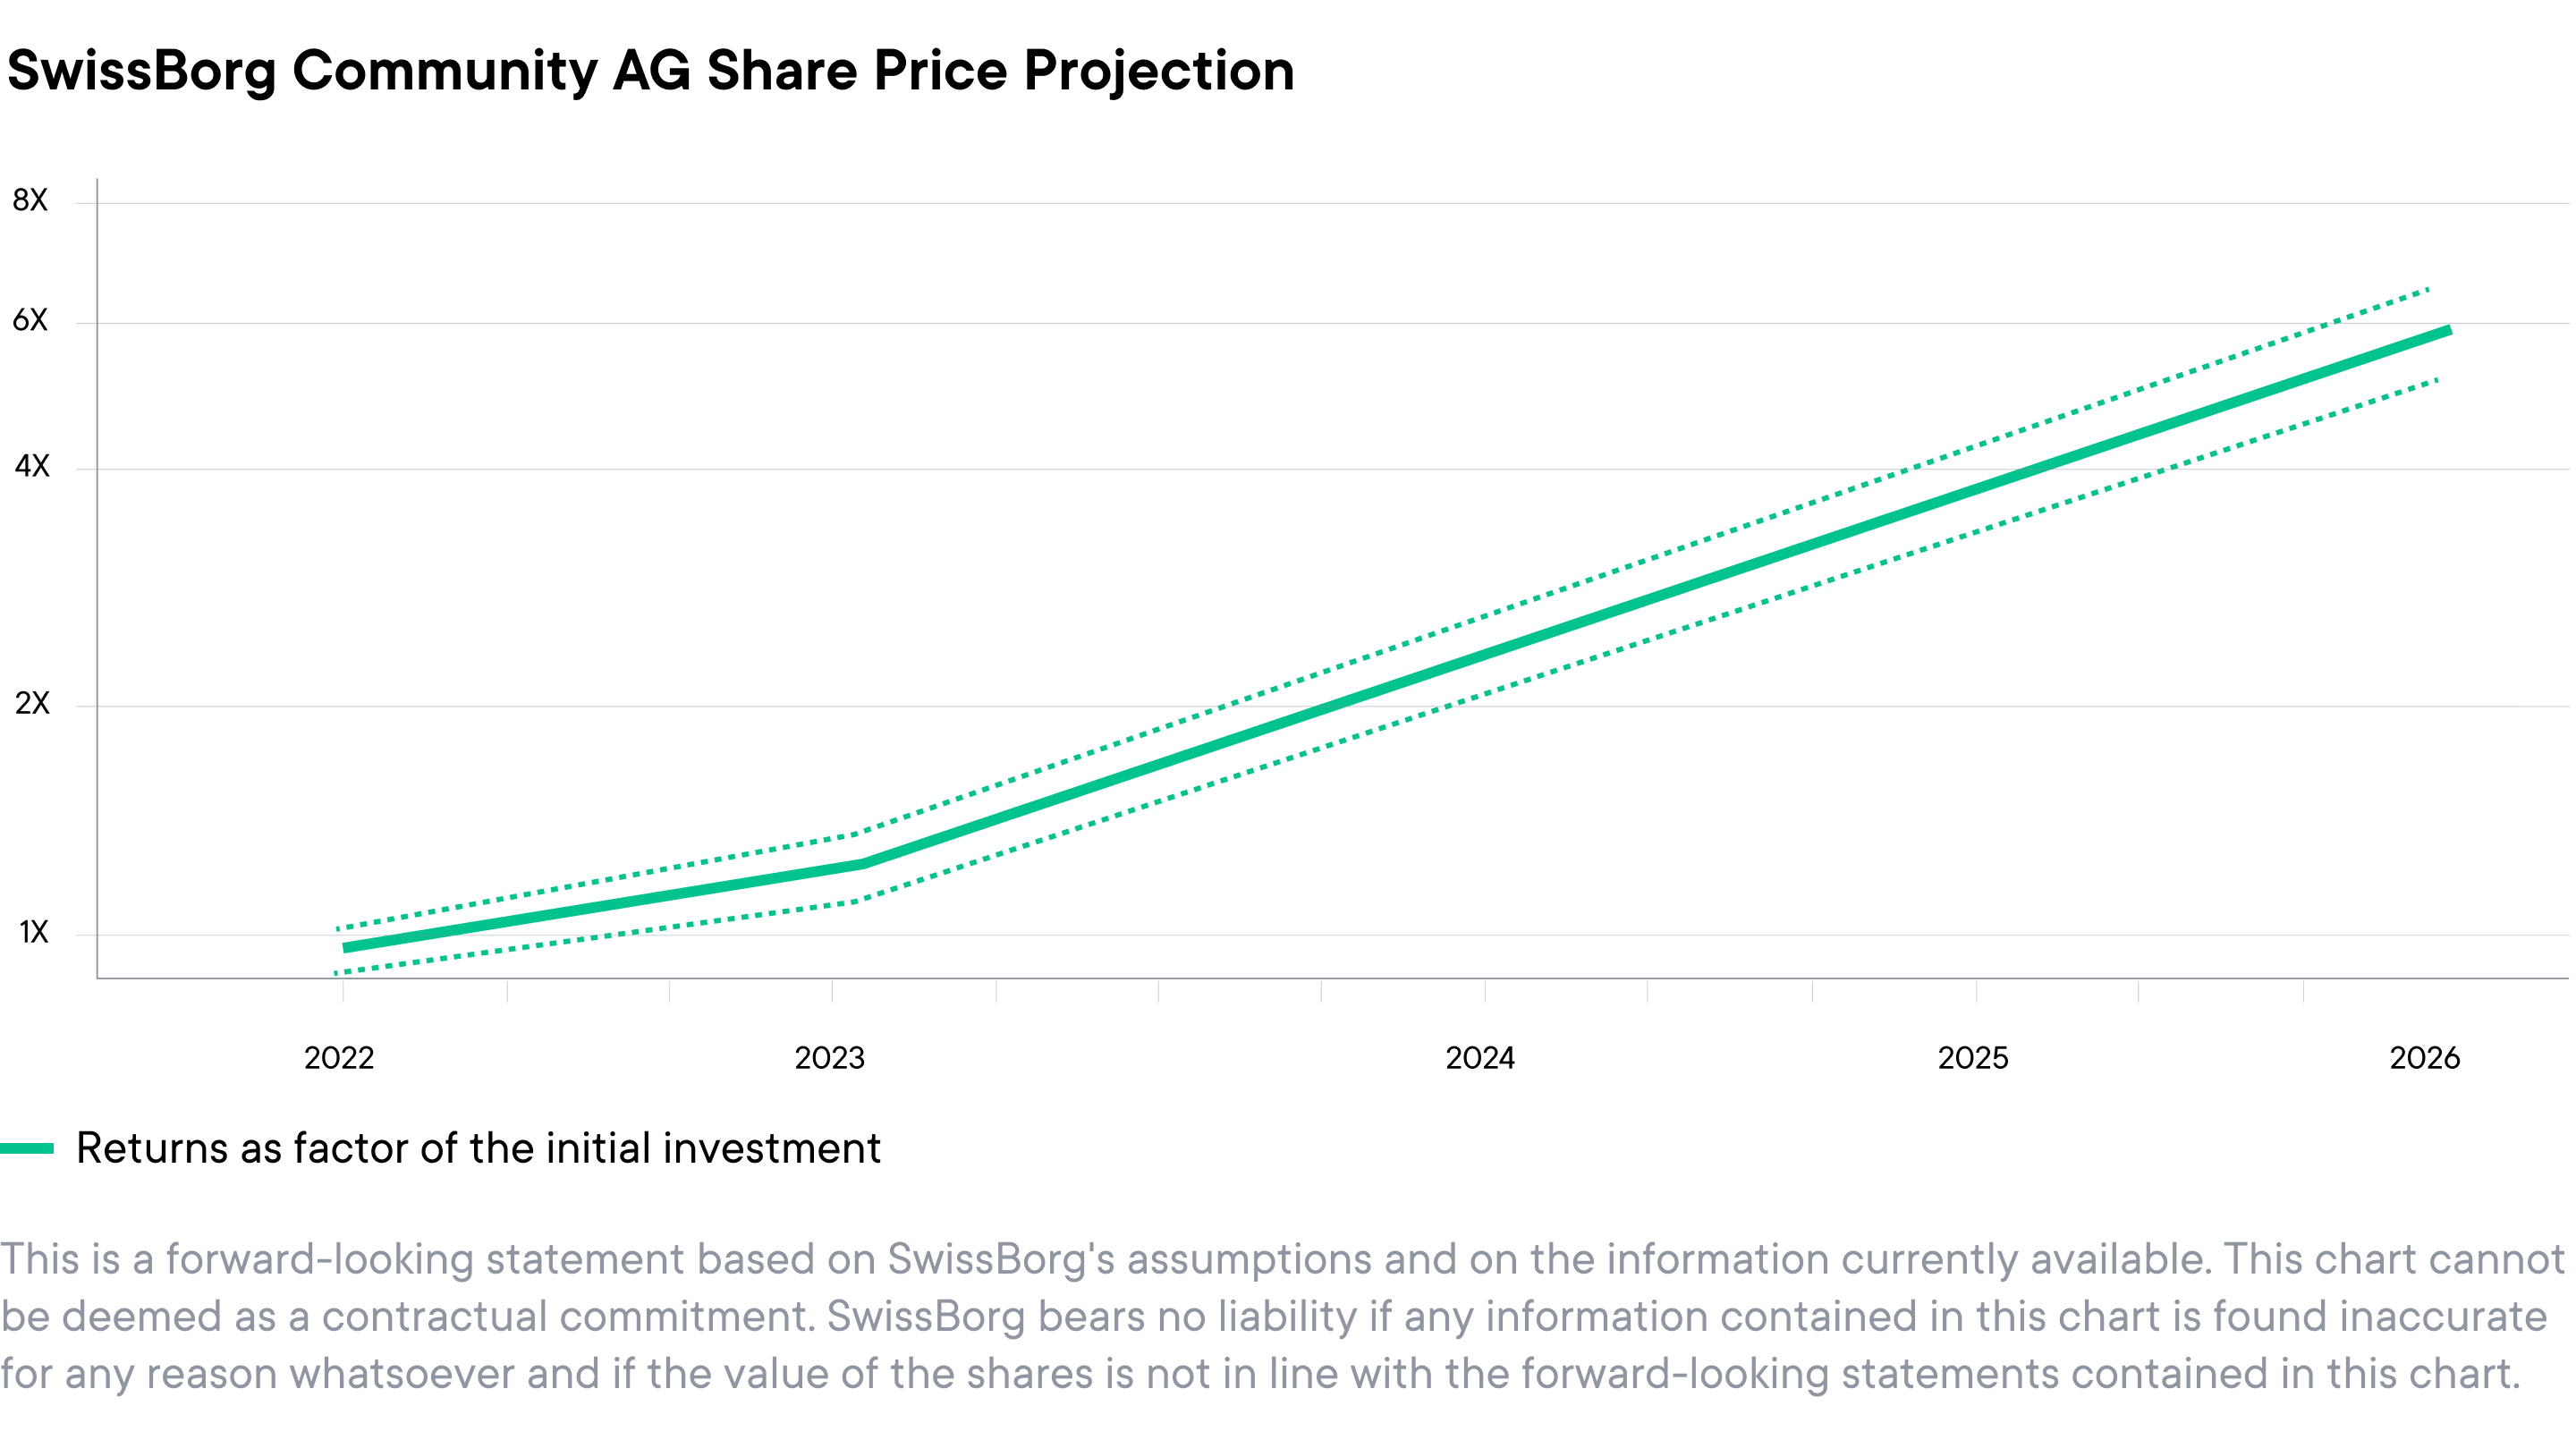 Price projection